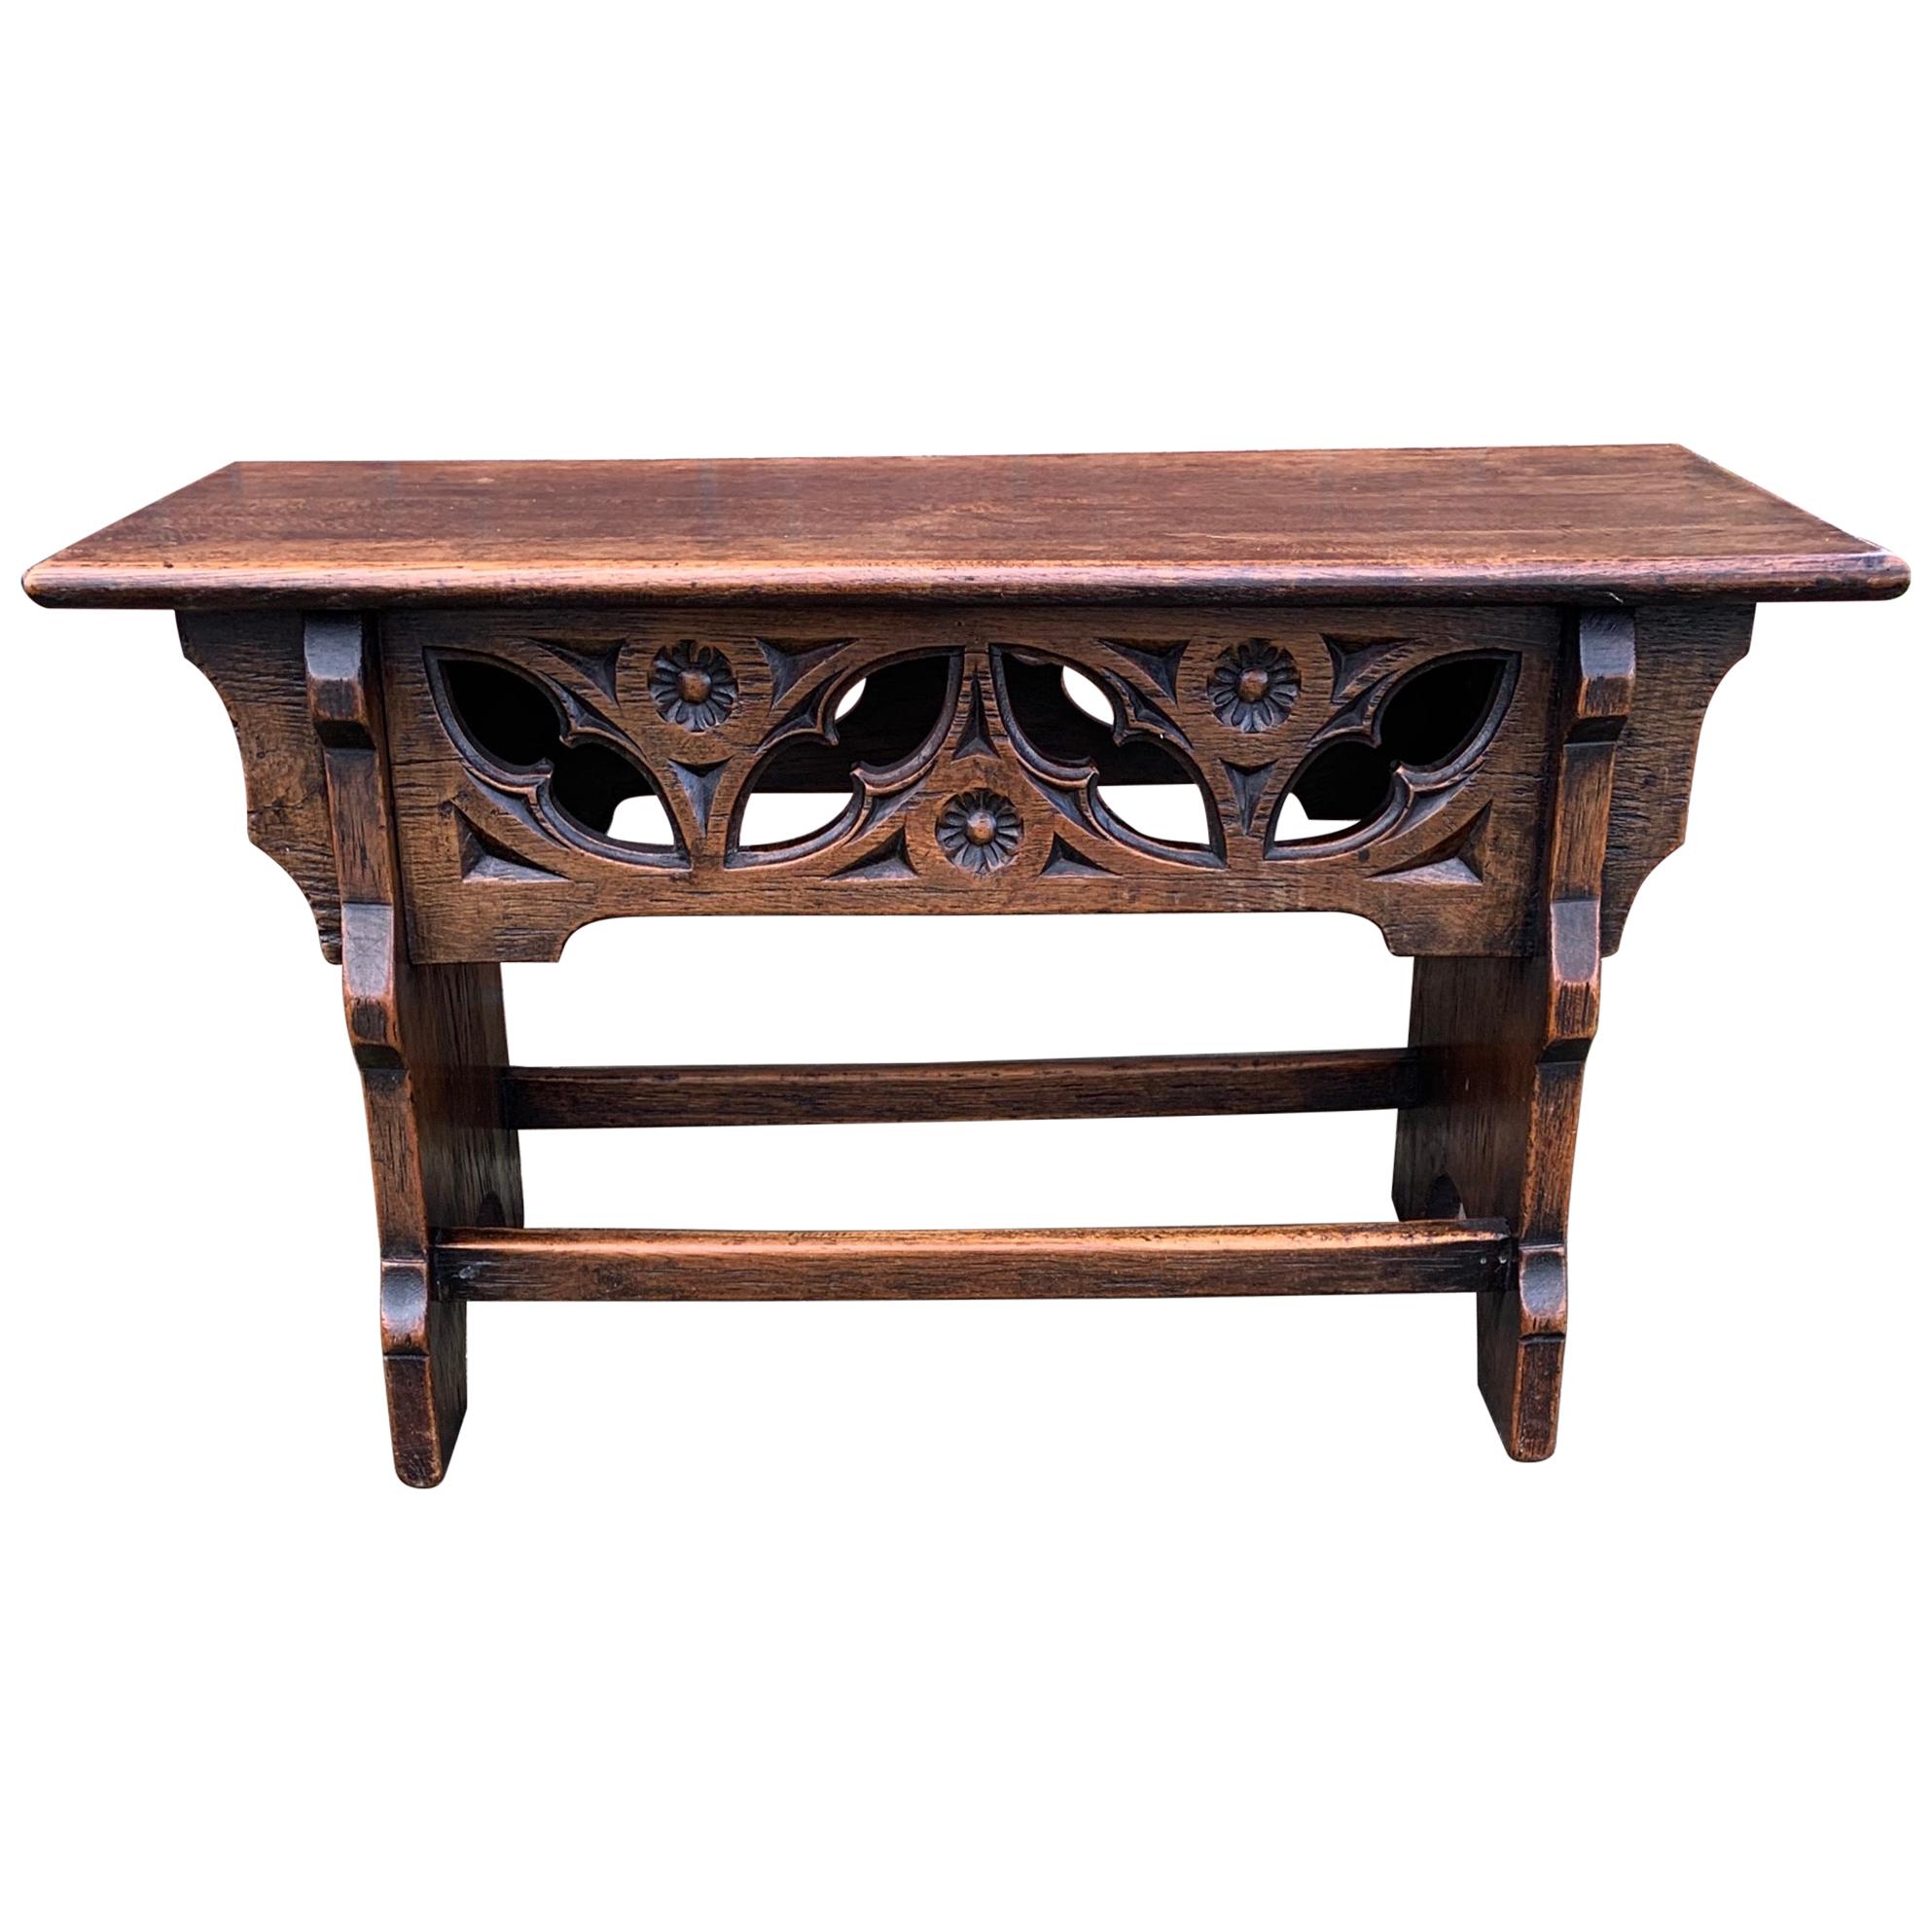 Antique Early 1900s Gothic Revival Stool or Table with Hand Carved Elements For Sale